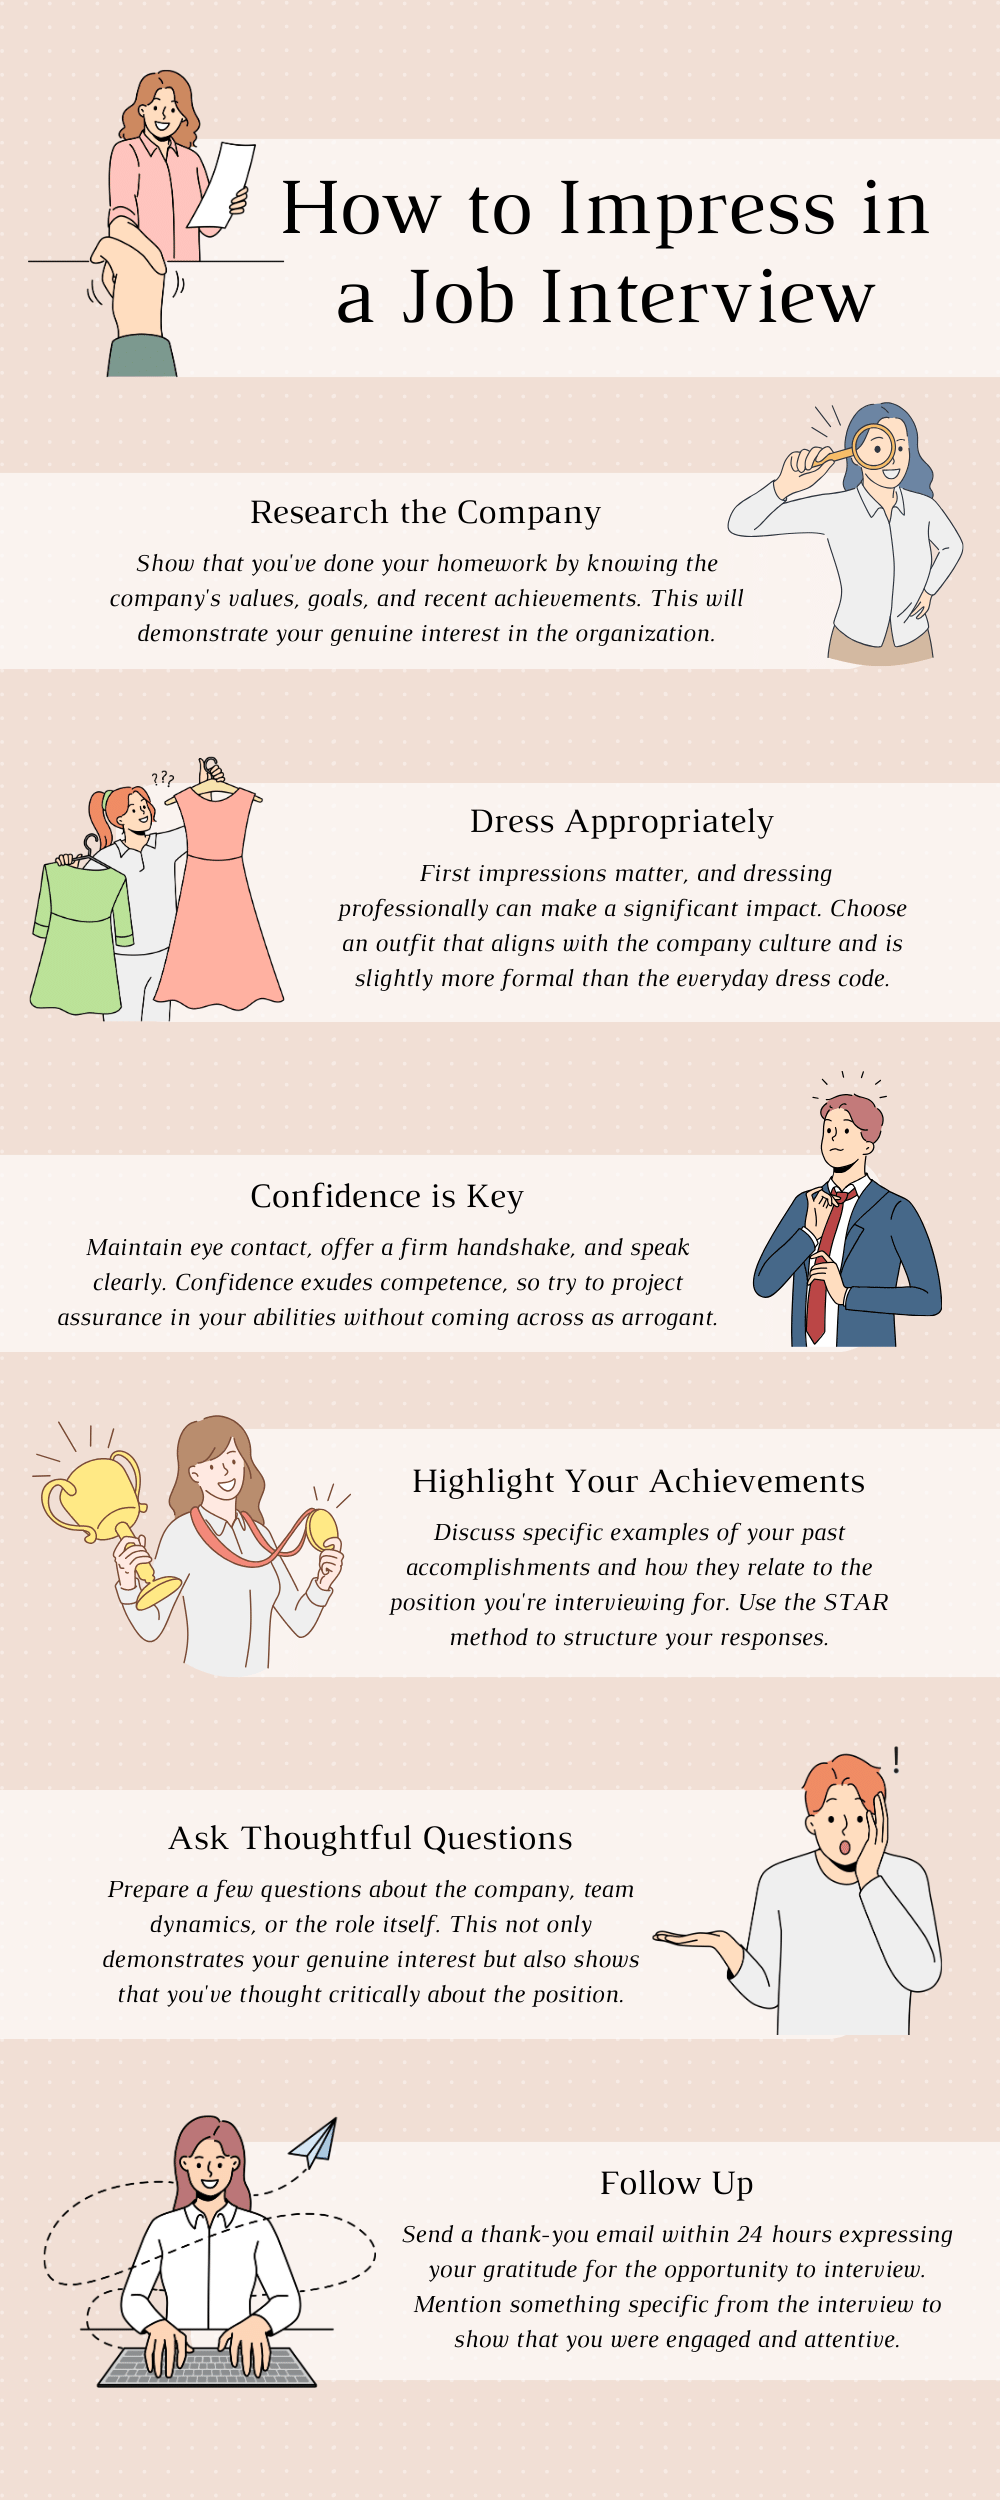 Some cool tips to impress in an interview